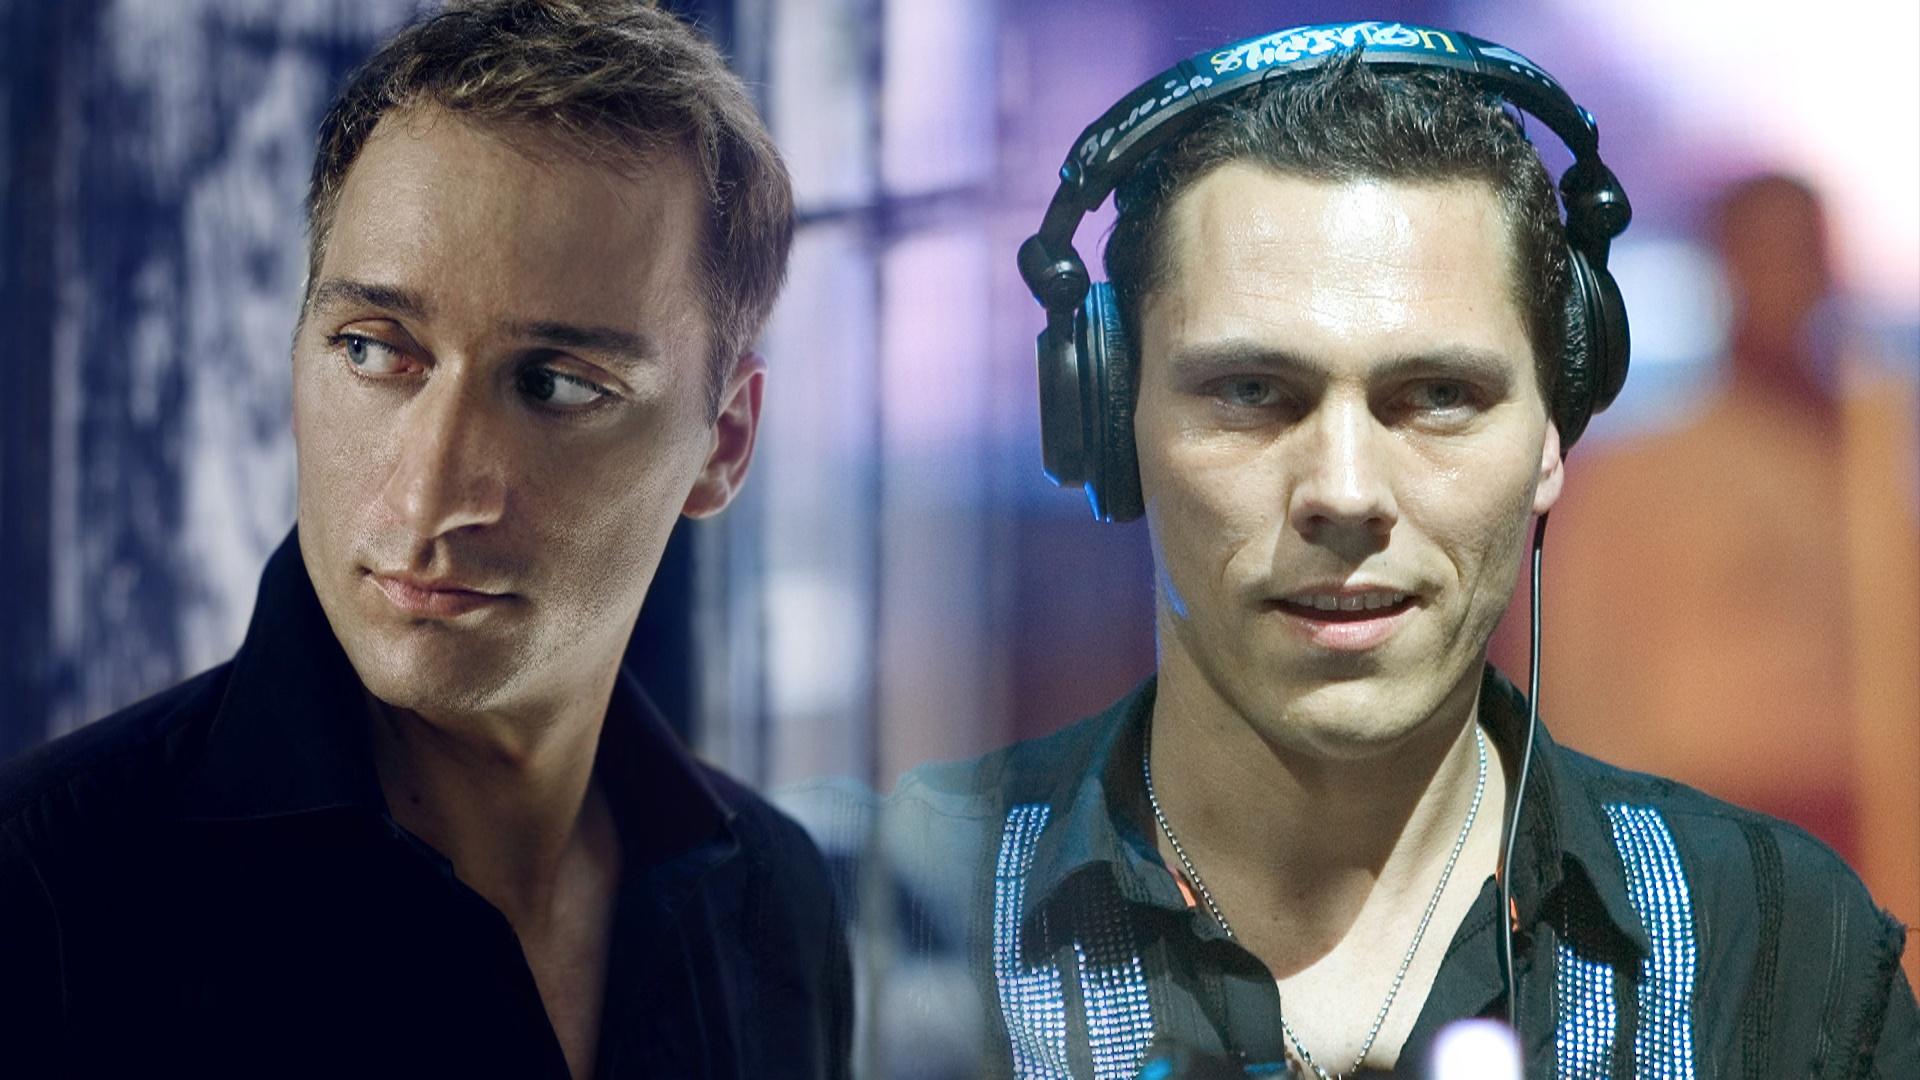 Tiësto and Paul van Dyk are the most travelled musicians of all time